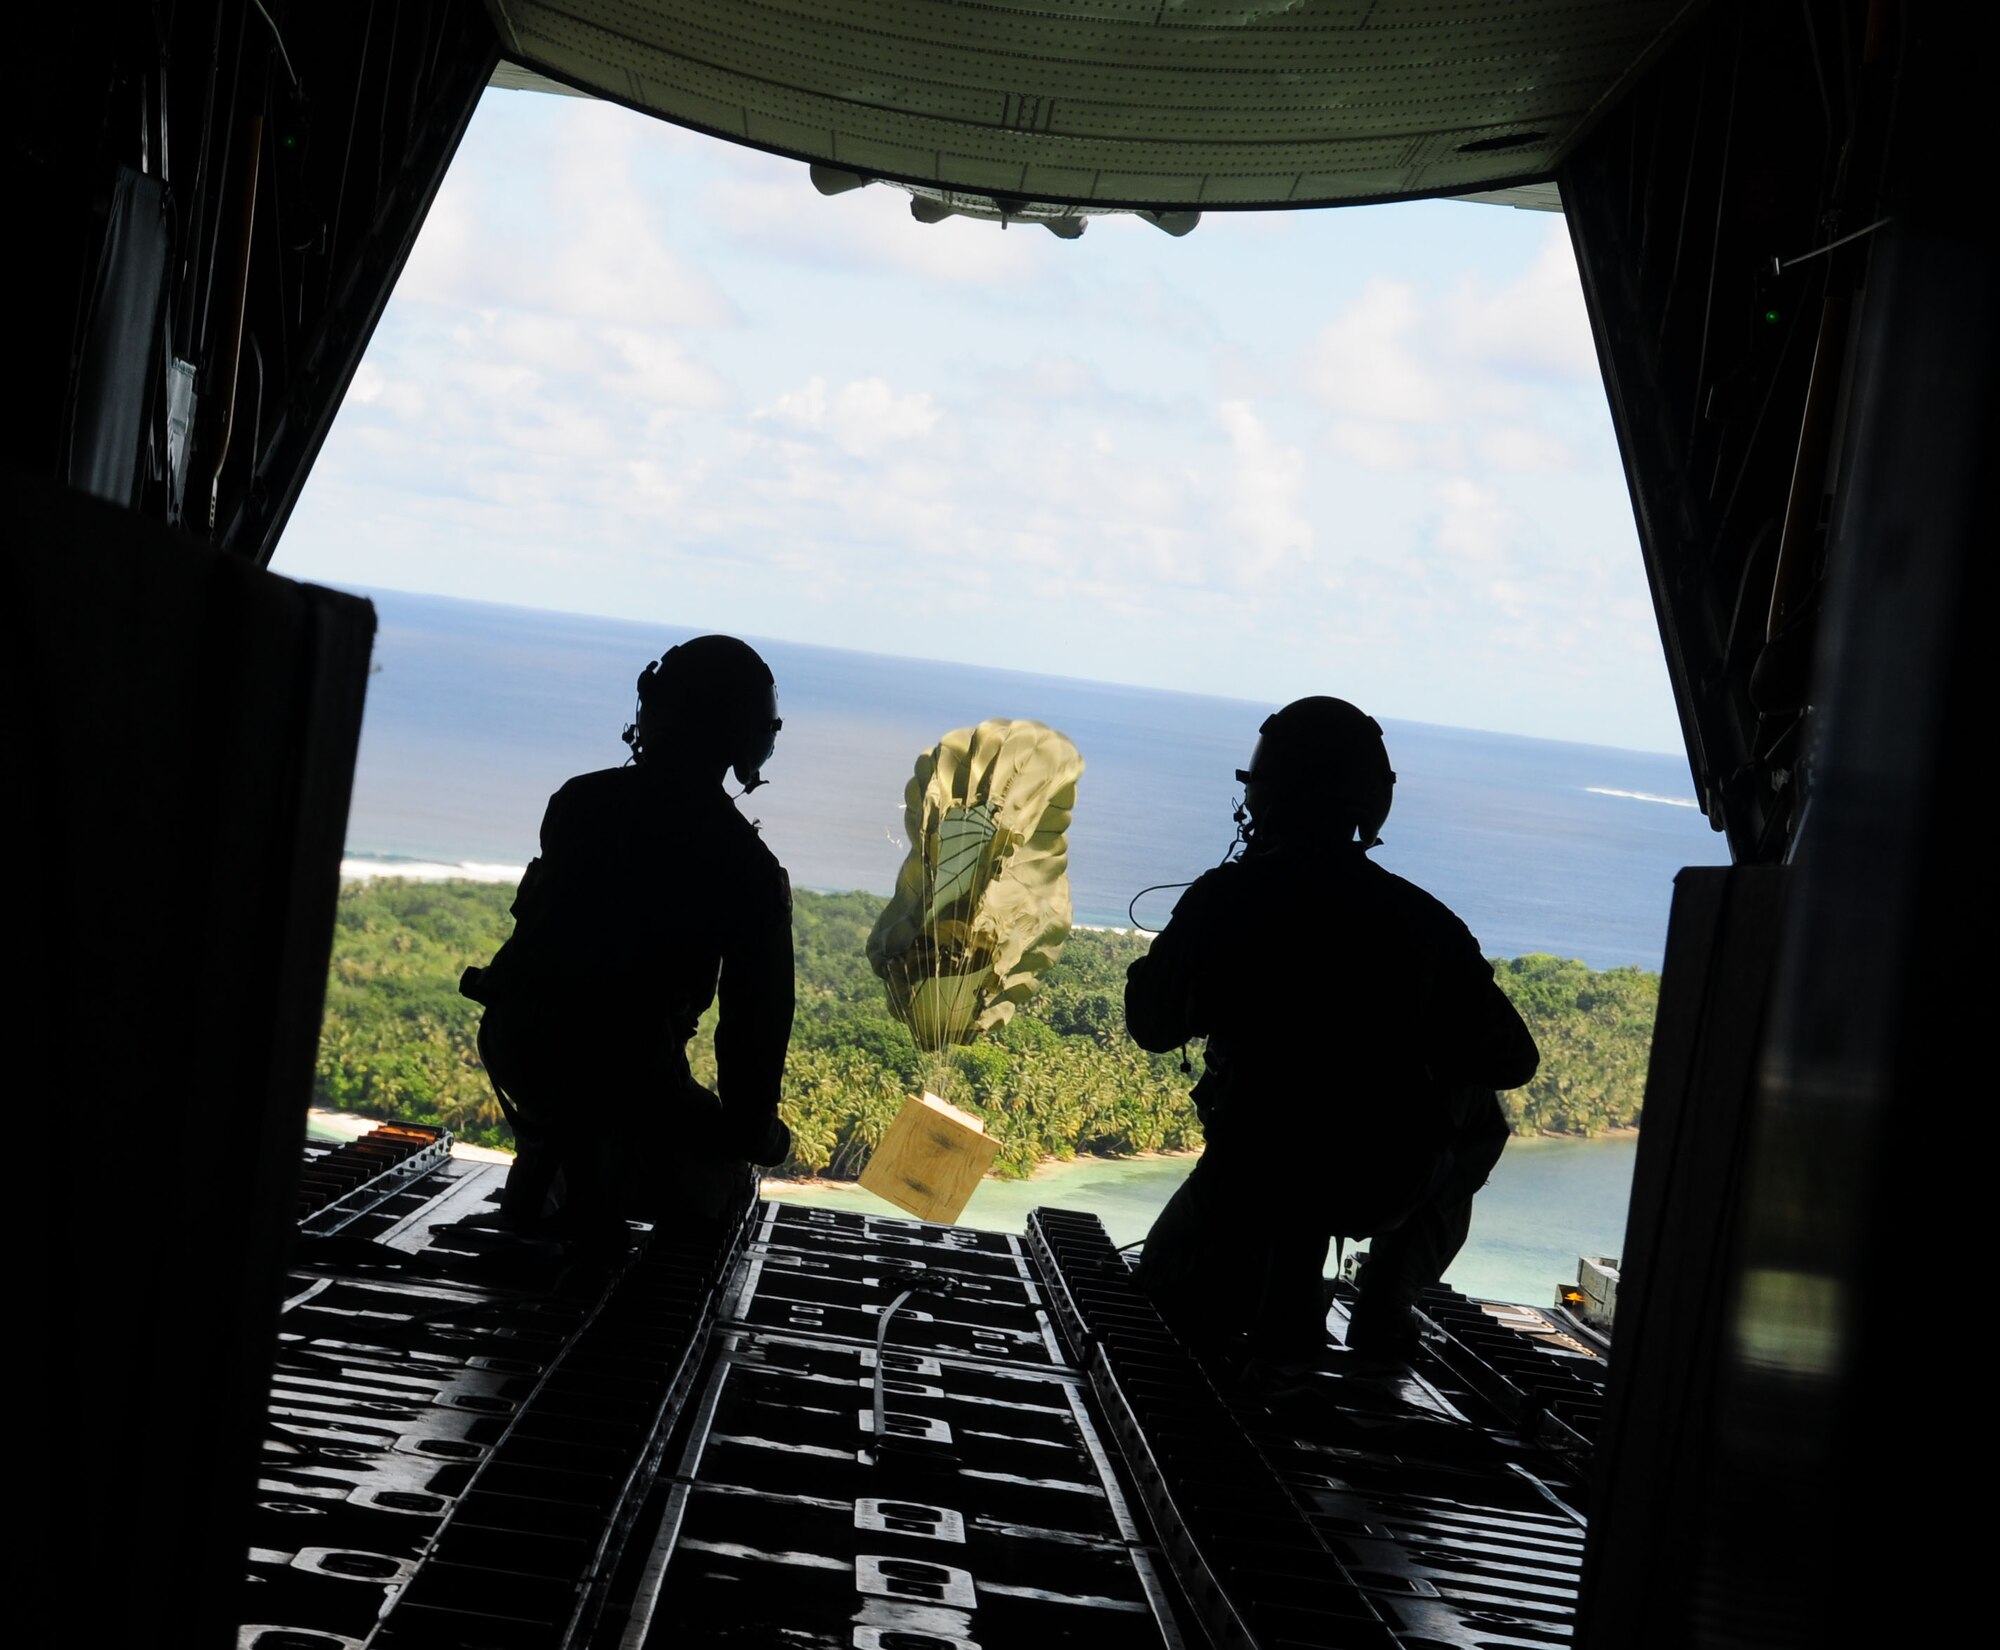 Airmen from the 36th Airlift Squadron, Yokota Air Base, Japan, watch as the parachute deploys and a box of humanitarian goods travels to the Yap Islands below during Operation Christmas Drop, Dec. 14. Operation Christmas Drop is the Air Force?s longest-running humanitarian which began in 1952. What started as a WB-50 aircrew returning to Guam on its final flight before Christmas has turned into the longest running humanitarian campaign in the history of the U.S. Air Force and the entire world. (U.S. Air Force photo Senior Airman Nichelle Anderson)